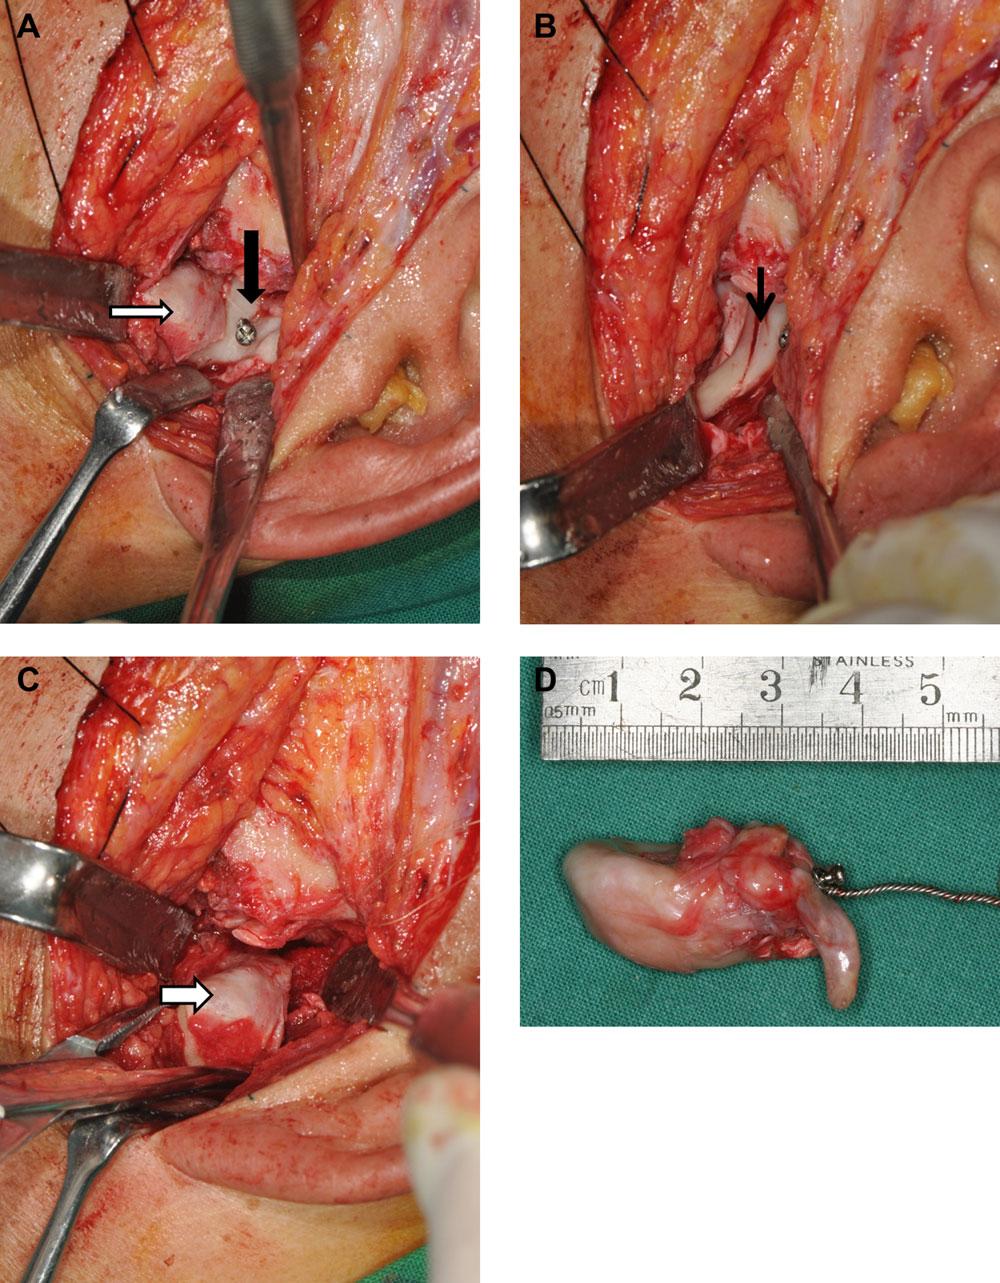 CHEN ET AL. FIGURE 4. Operative photographs. (A) The condyle (white arrow) was pushed infra-anteriorly to expose the mass (thick dark arrow).